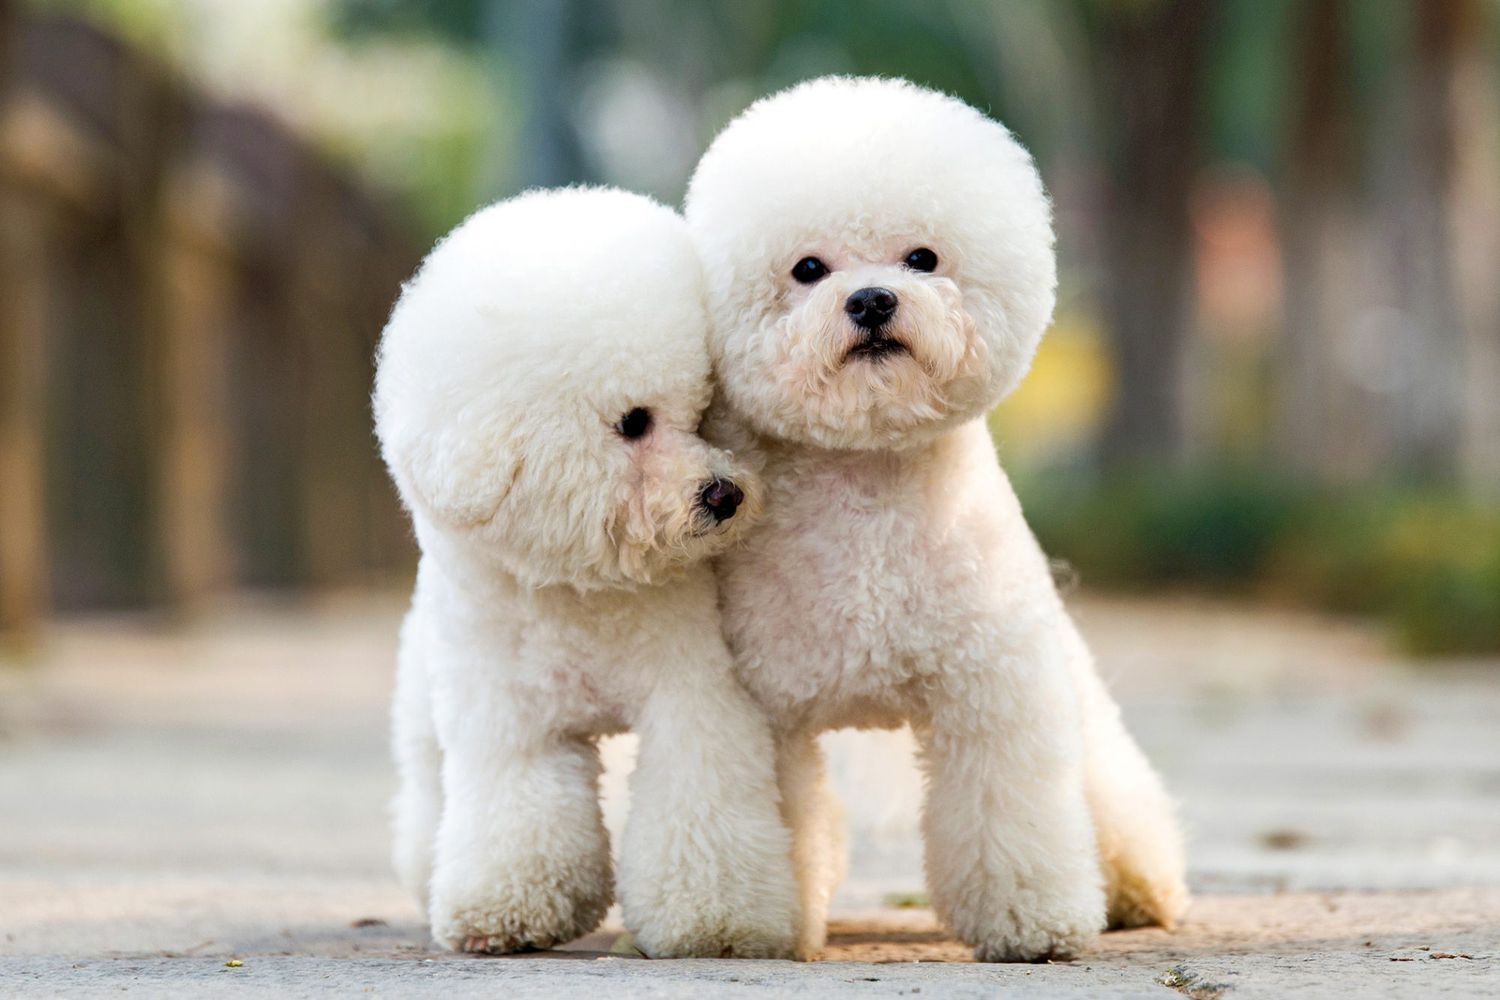 Toy Poodles are known companions of allergy patients